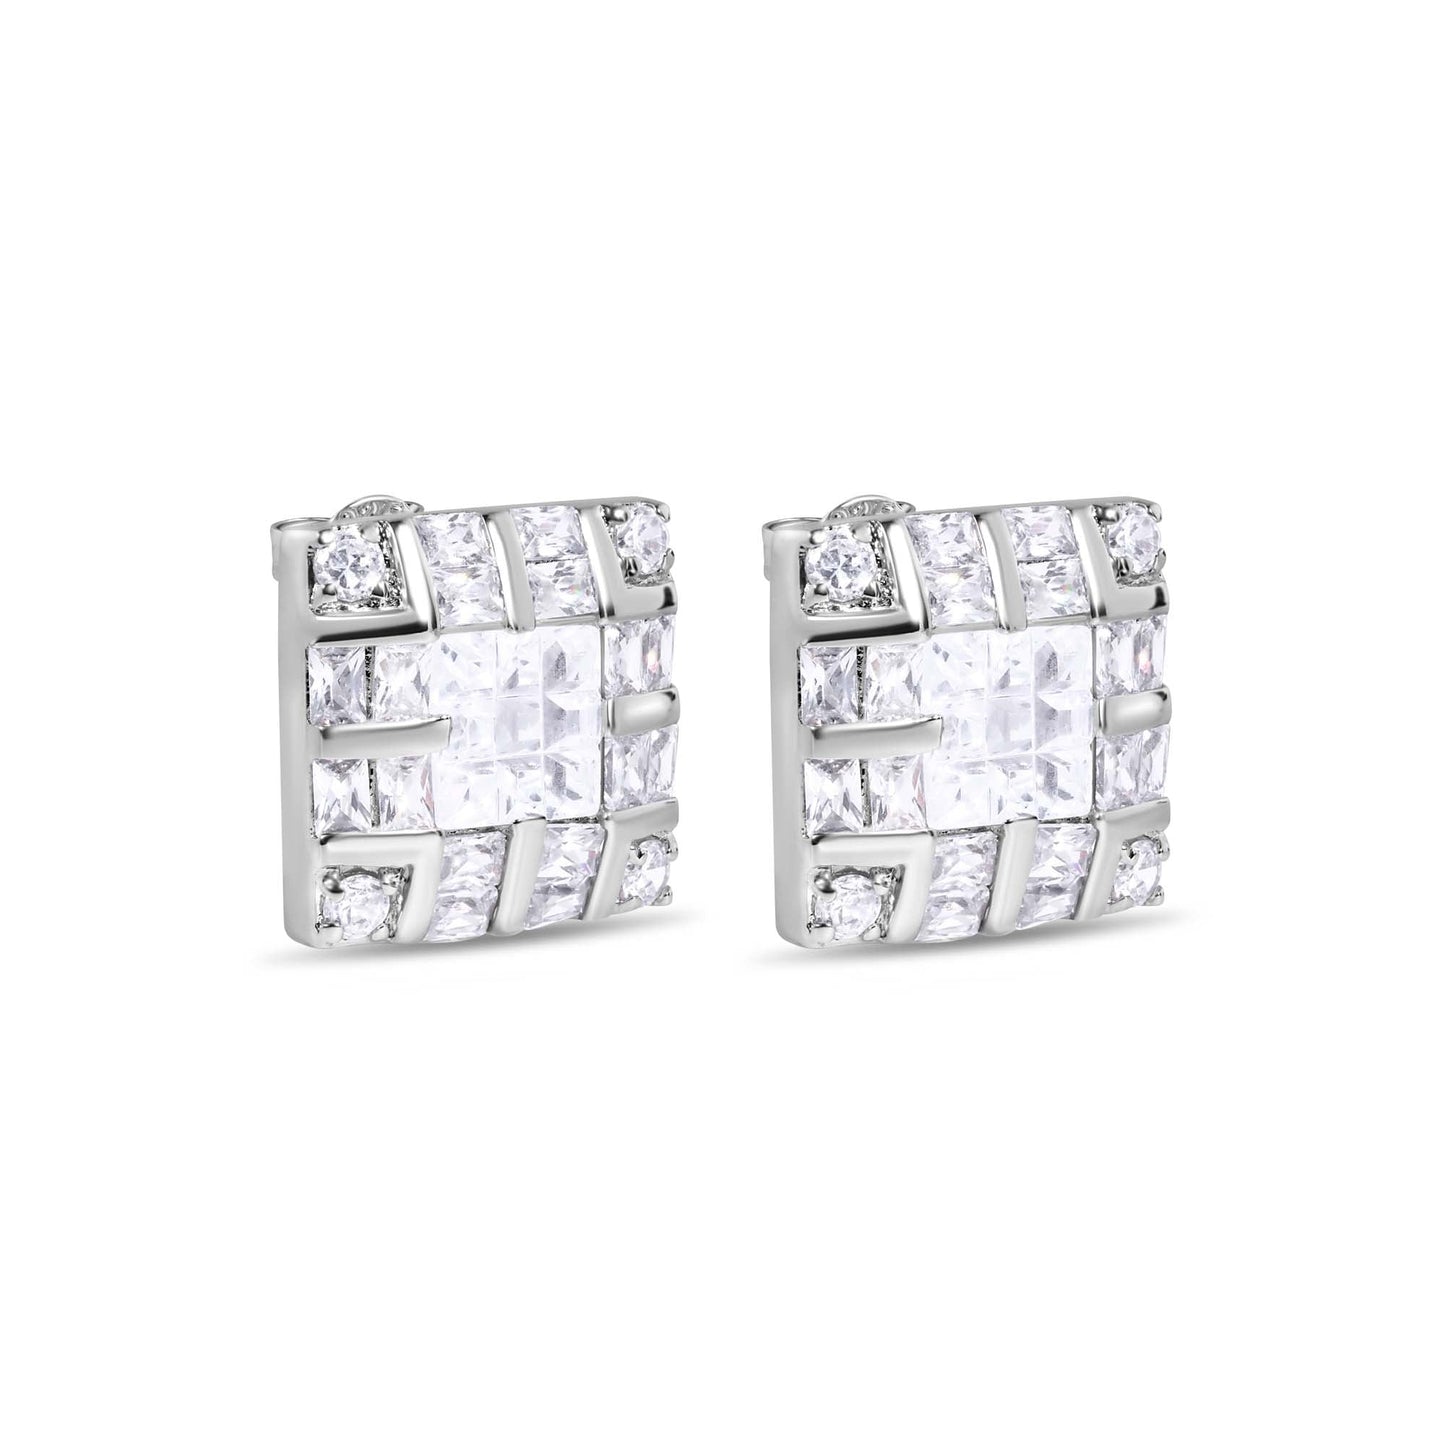 Final Price-Rhodium Plated 925 Sterling Silver Square INV Clear CZ Earrings 15mm - STEM131